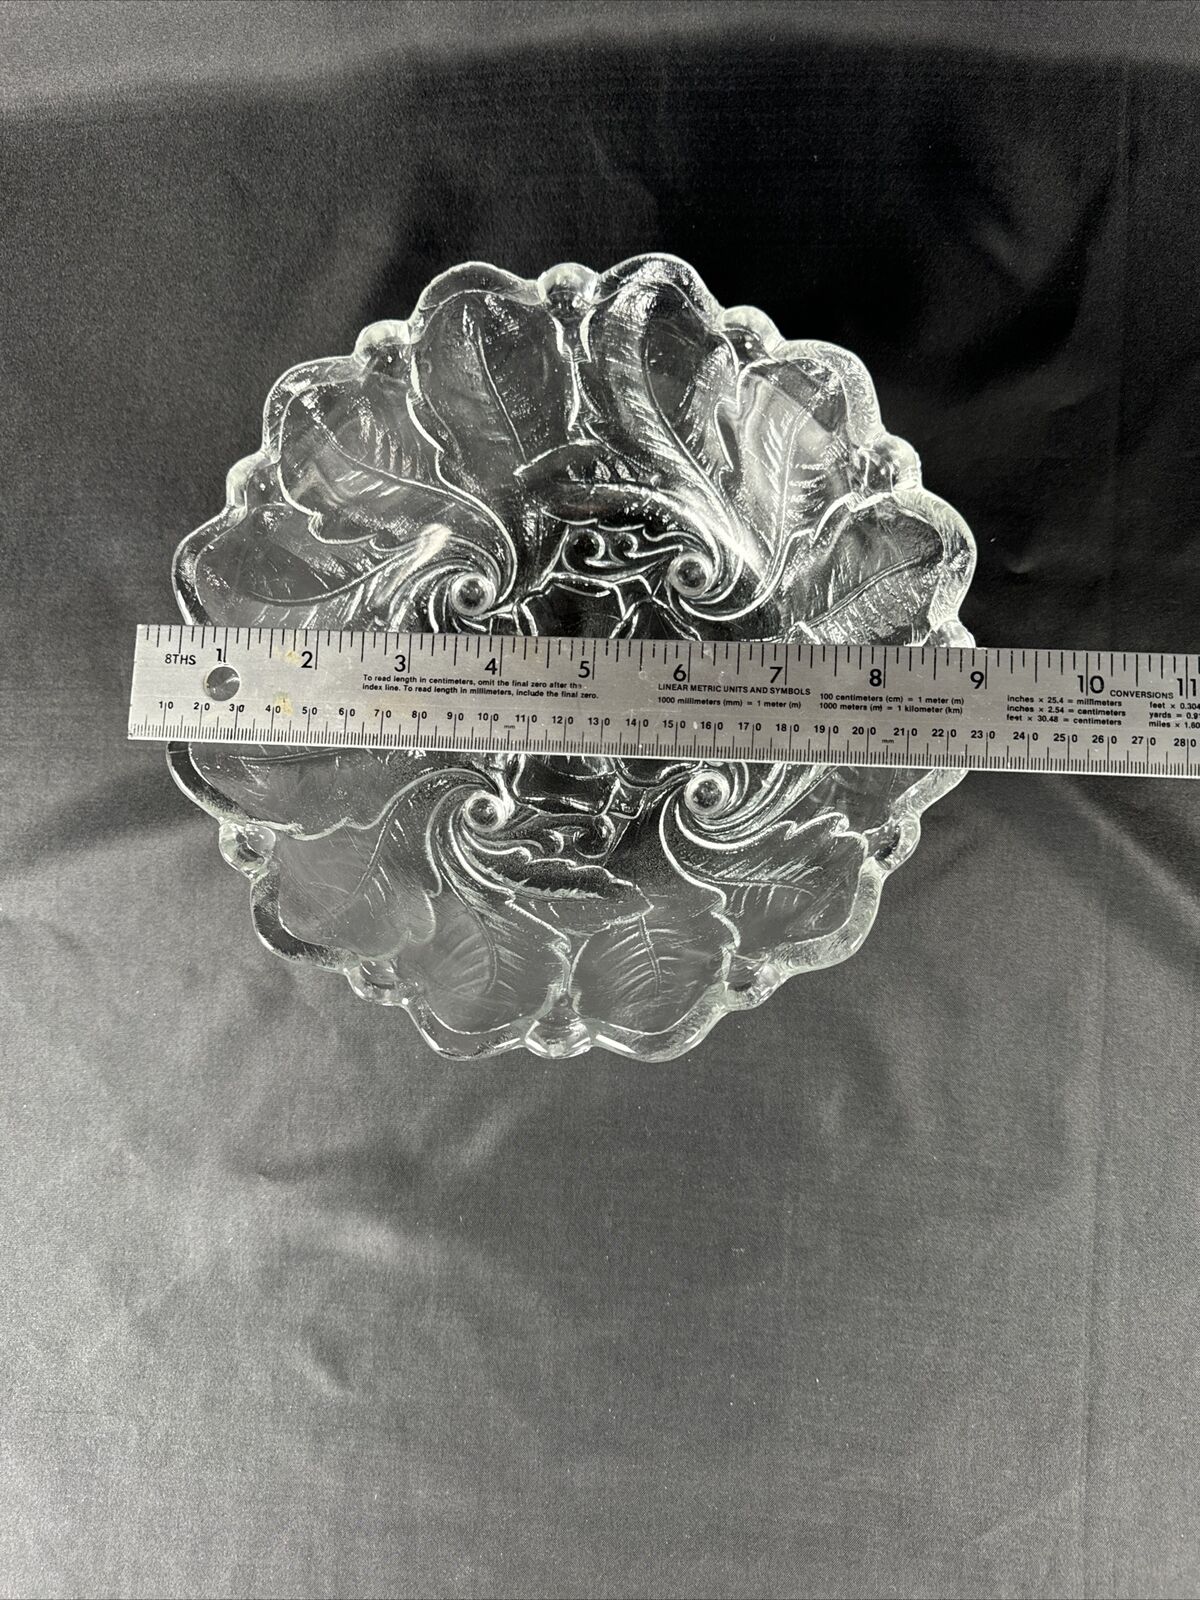 Vintage INDIANA GLASS CO. Clear Pressed Glass WILD ROSE Serving Platter And Bowl